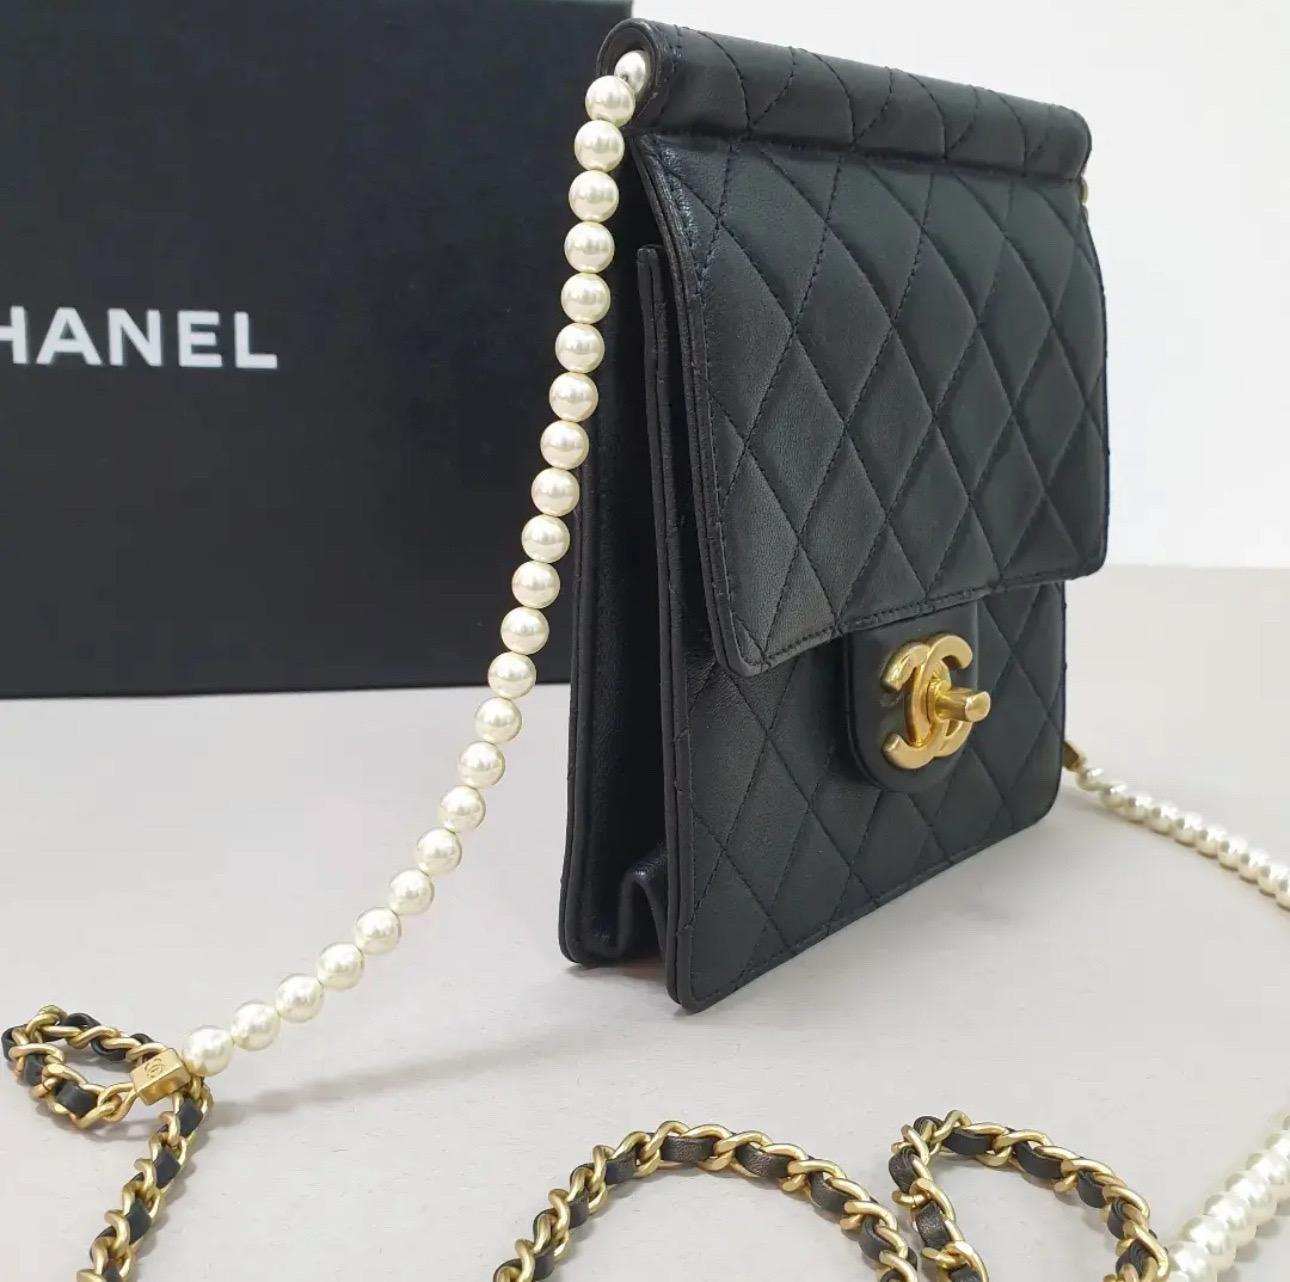 Chanel Black Small Chic Pearls Flap Bag For Sale 1